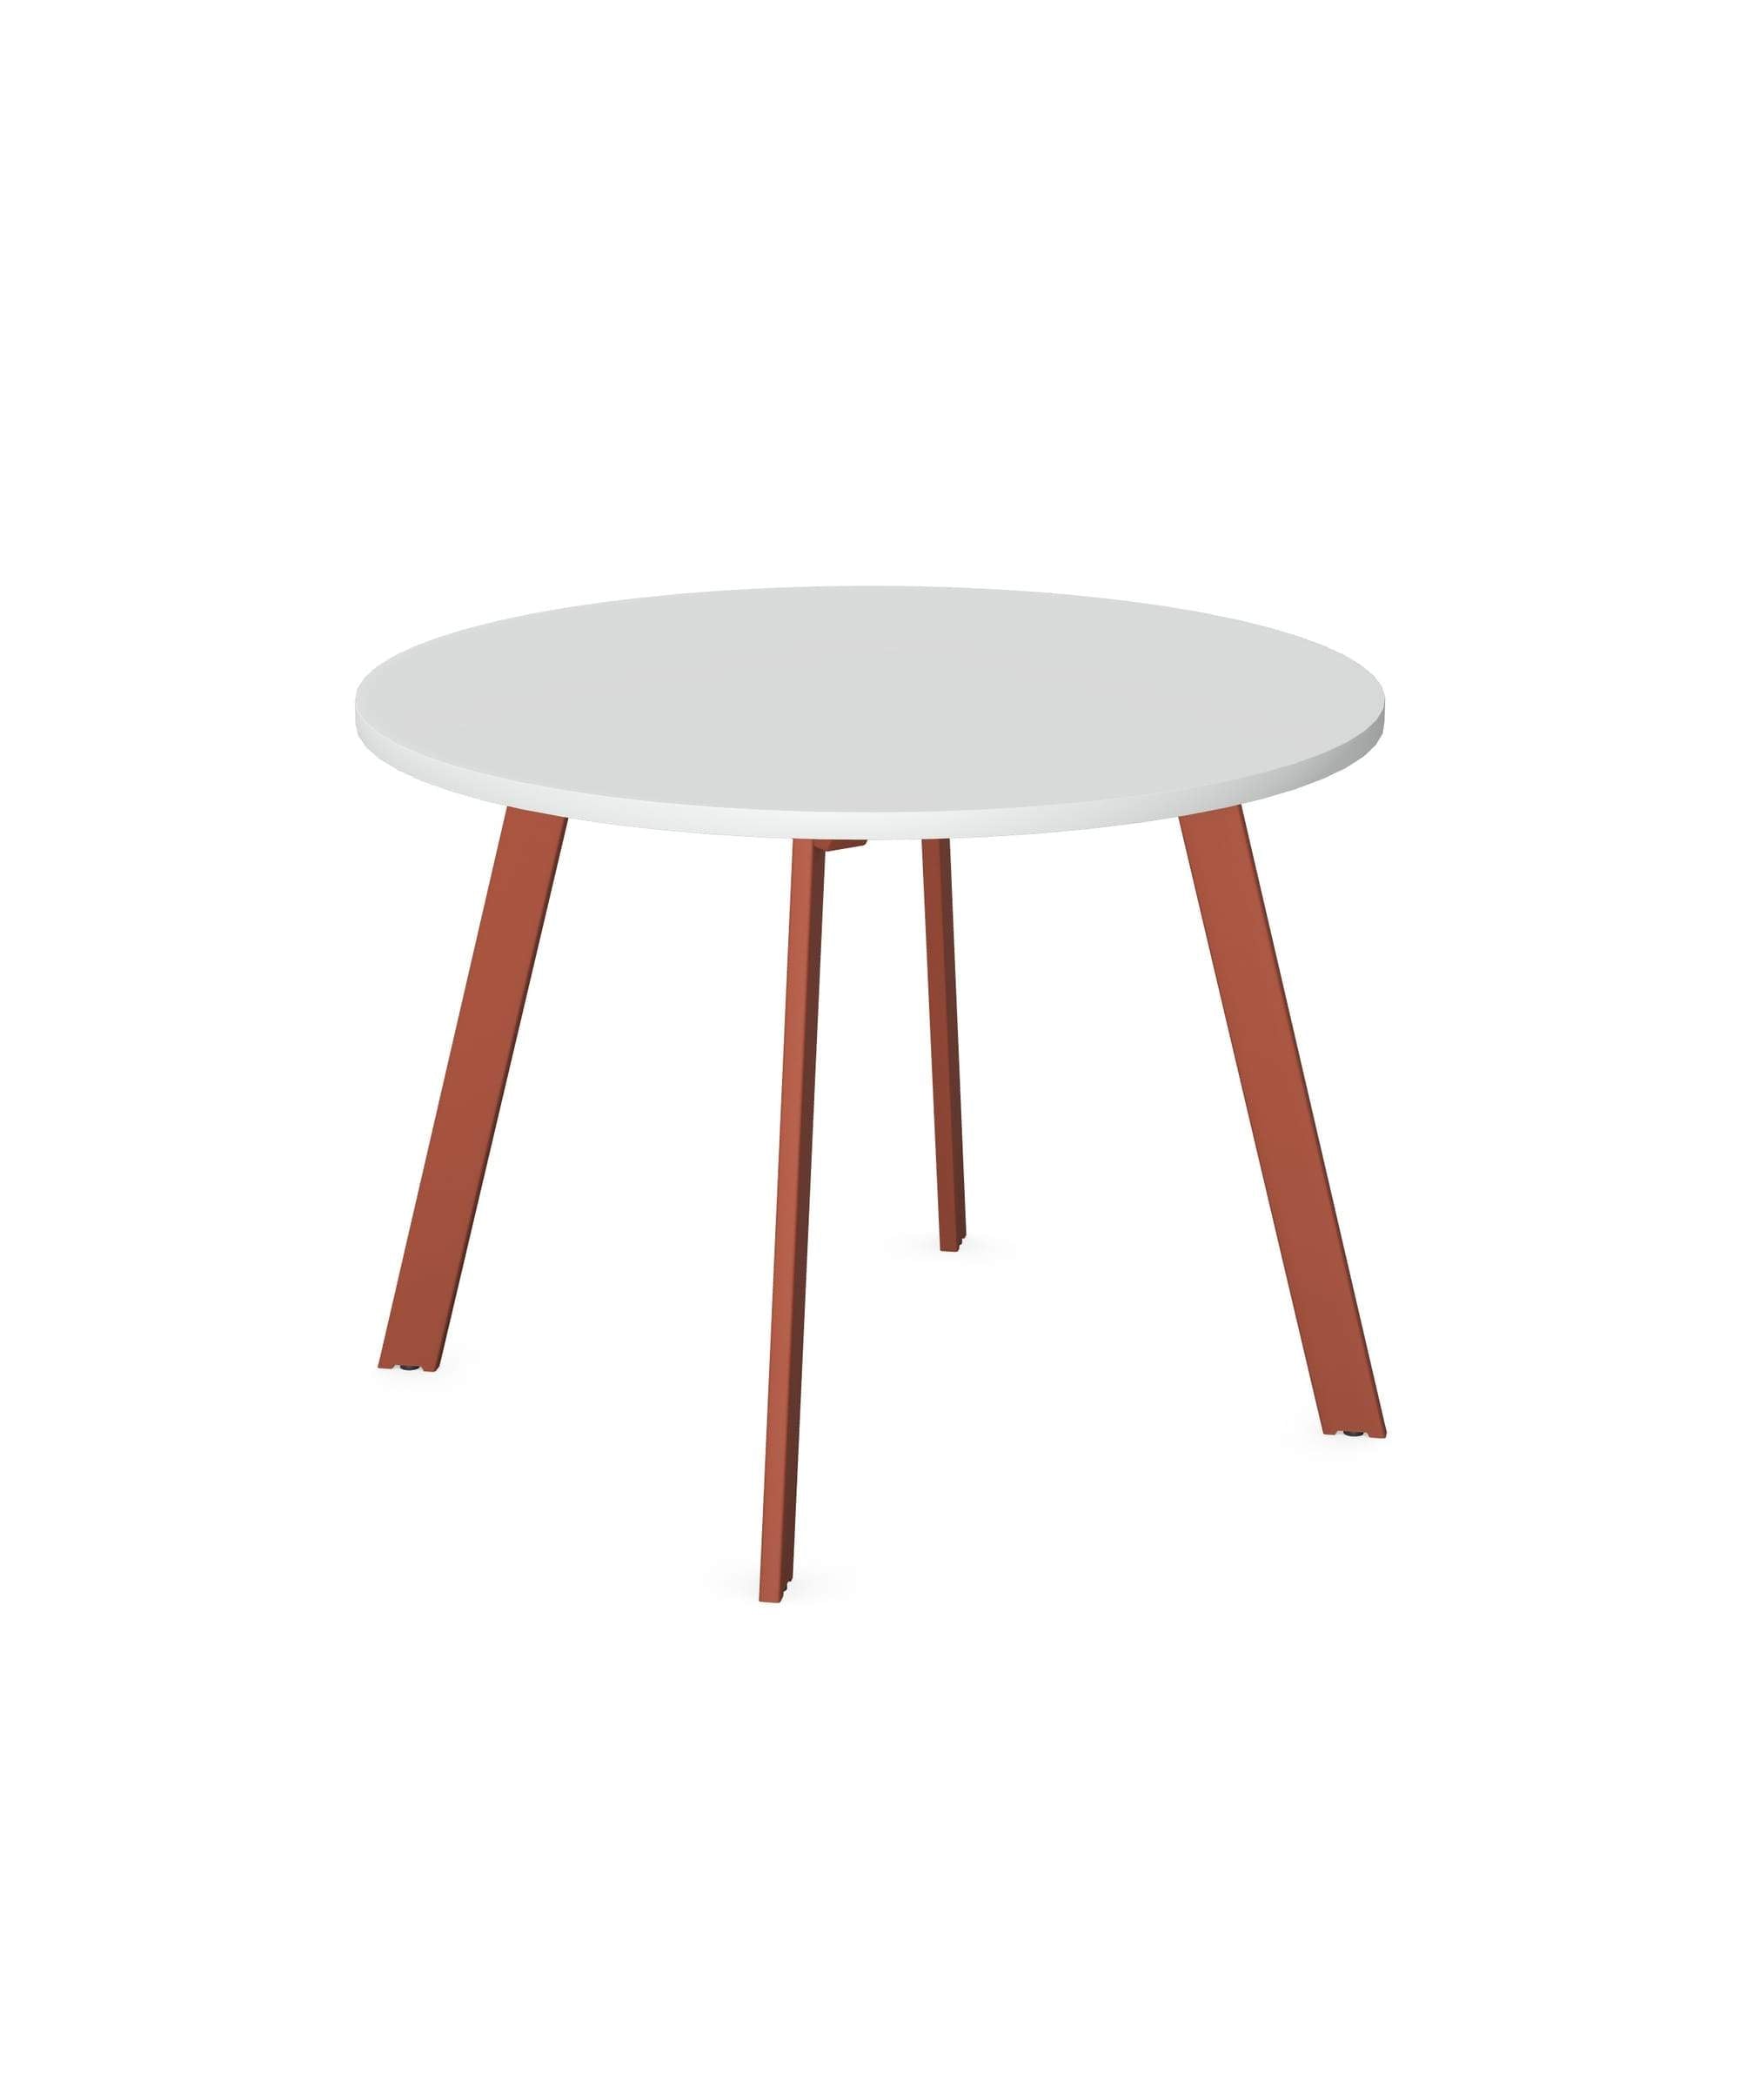 Axy-Line - Occasional Tables, Round Tops, Leg-A